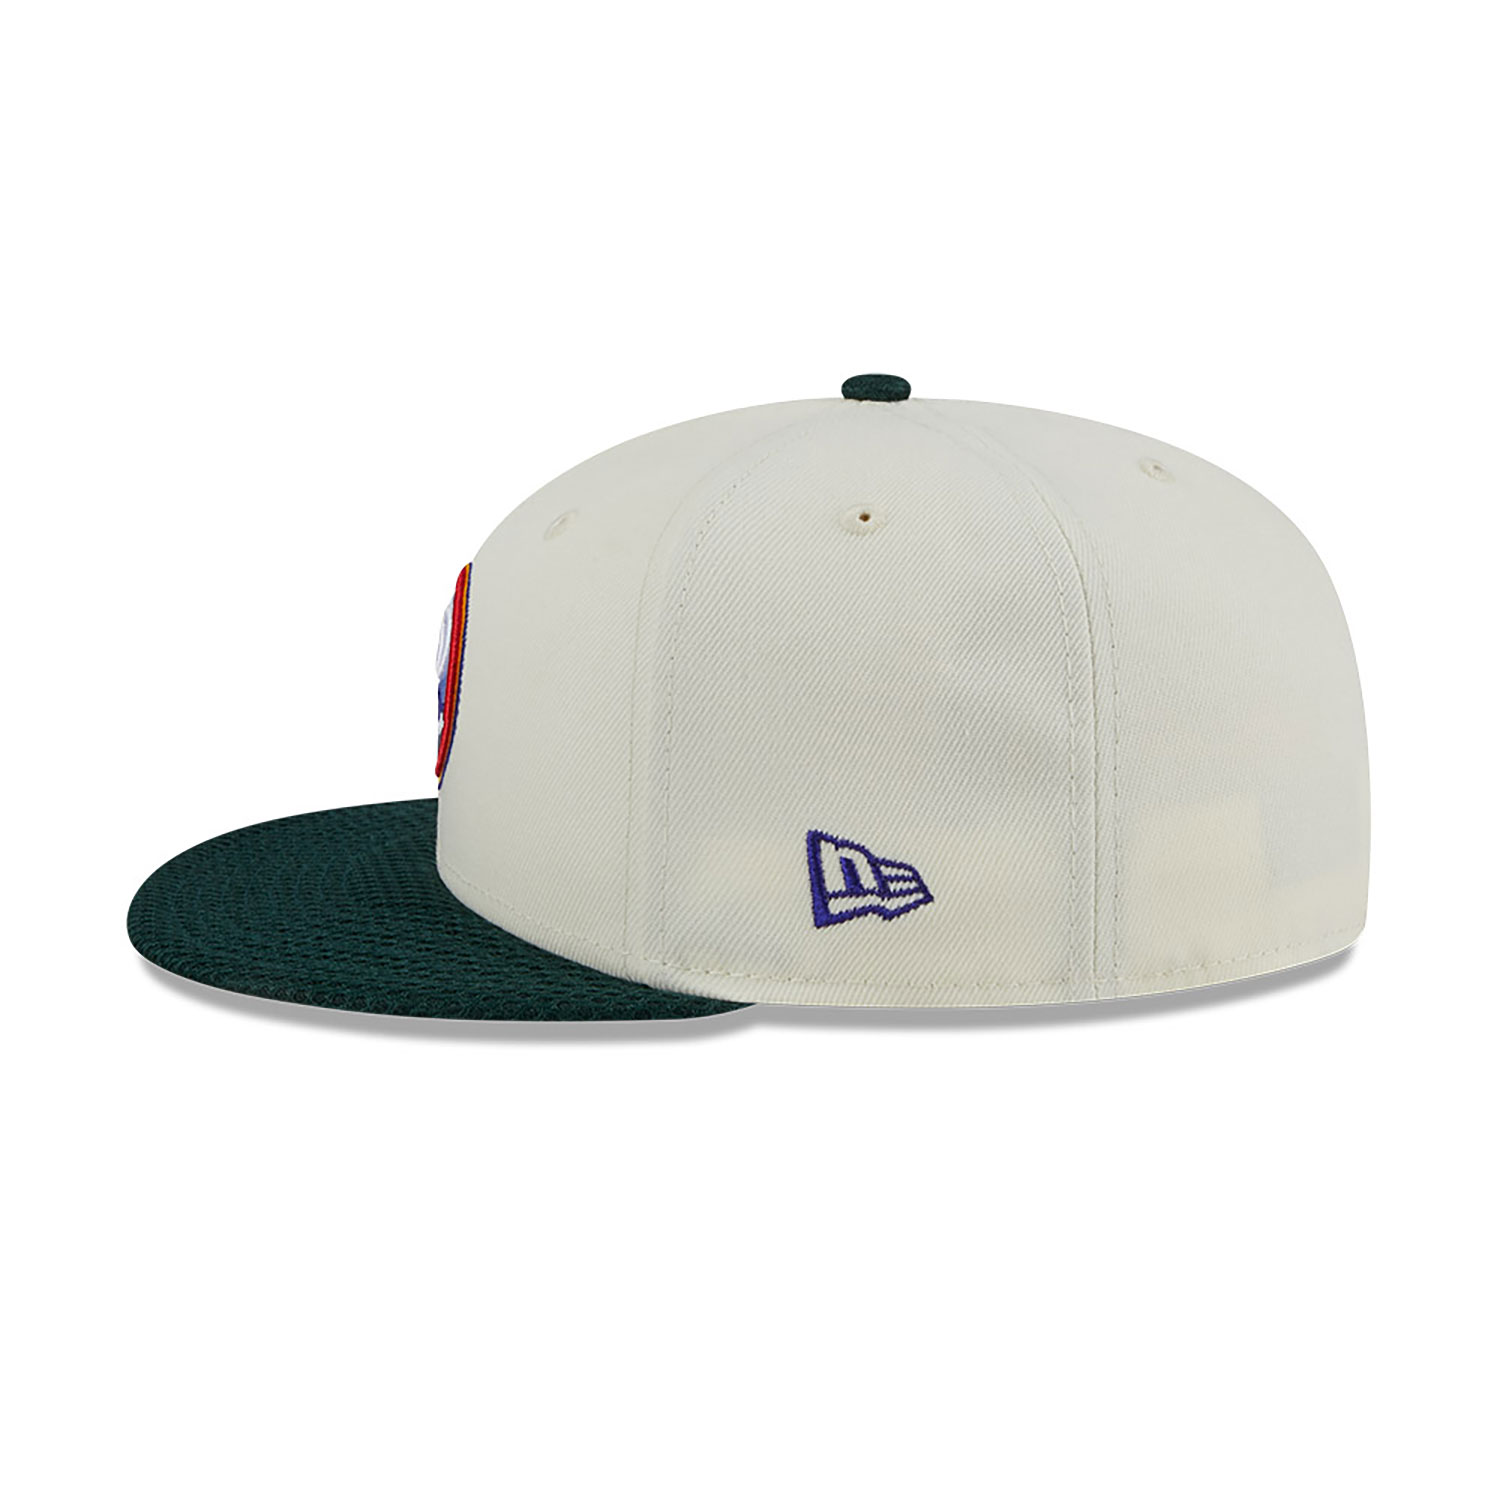 Colorado Rockies City Mesh Chrome White 59FIFTY Fitted Cap